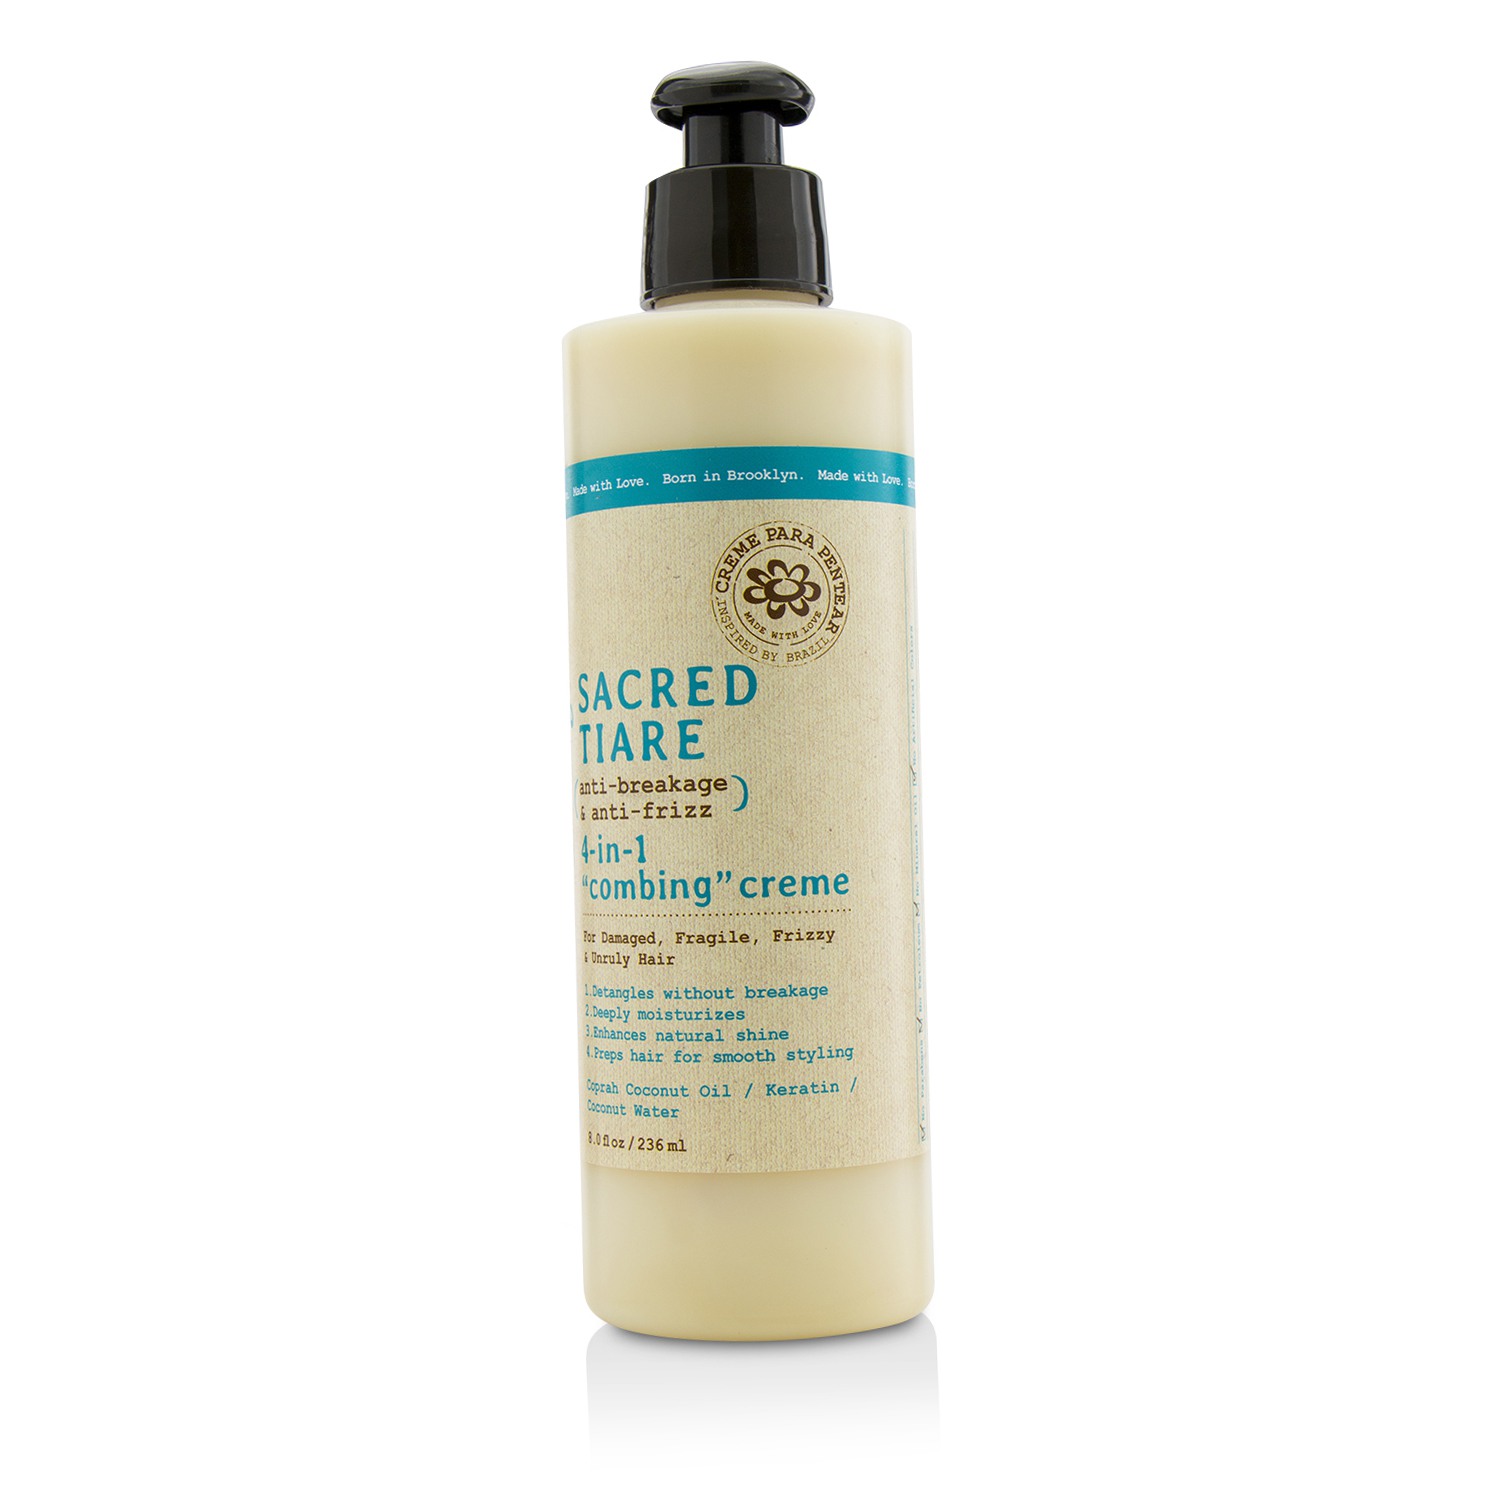 Sacred Tiare Anti-Breakage & Anti-Frizz 4-in-1 Combing Creme (For Damaged Fragile Frizzy & Unruly Hair) Carols Daughter Image